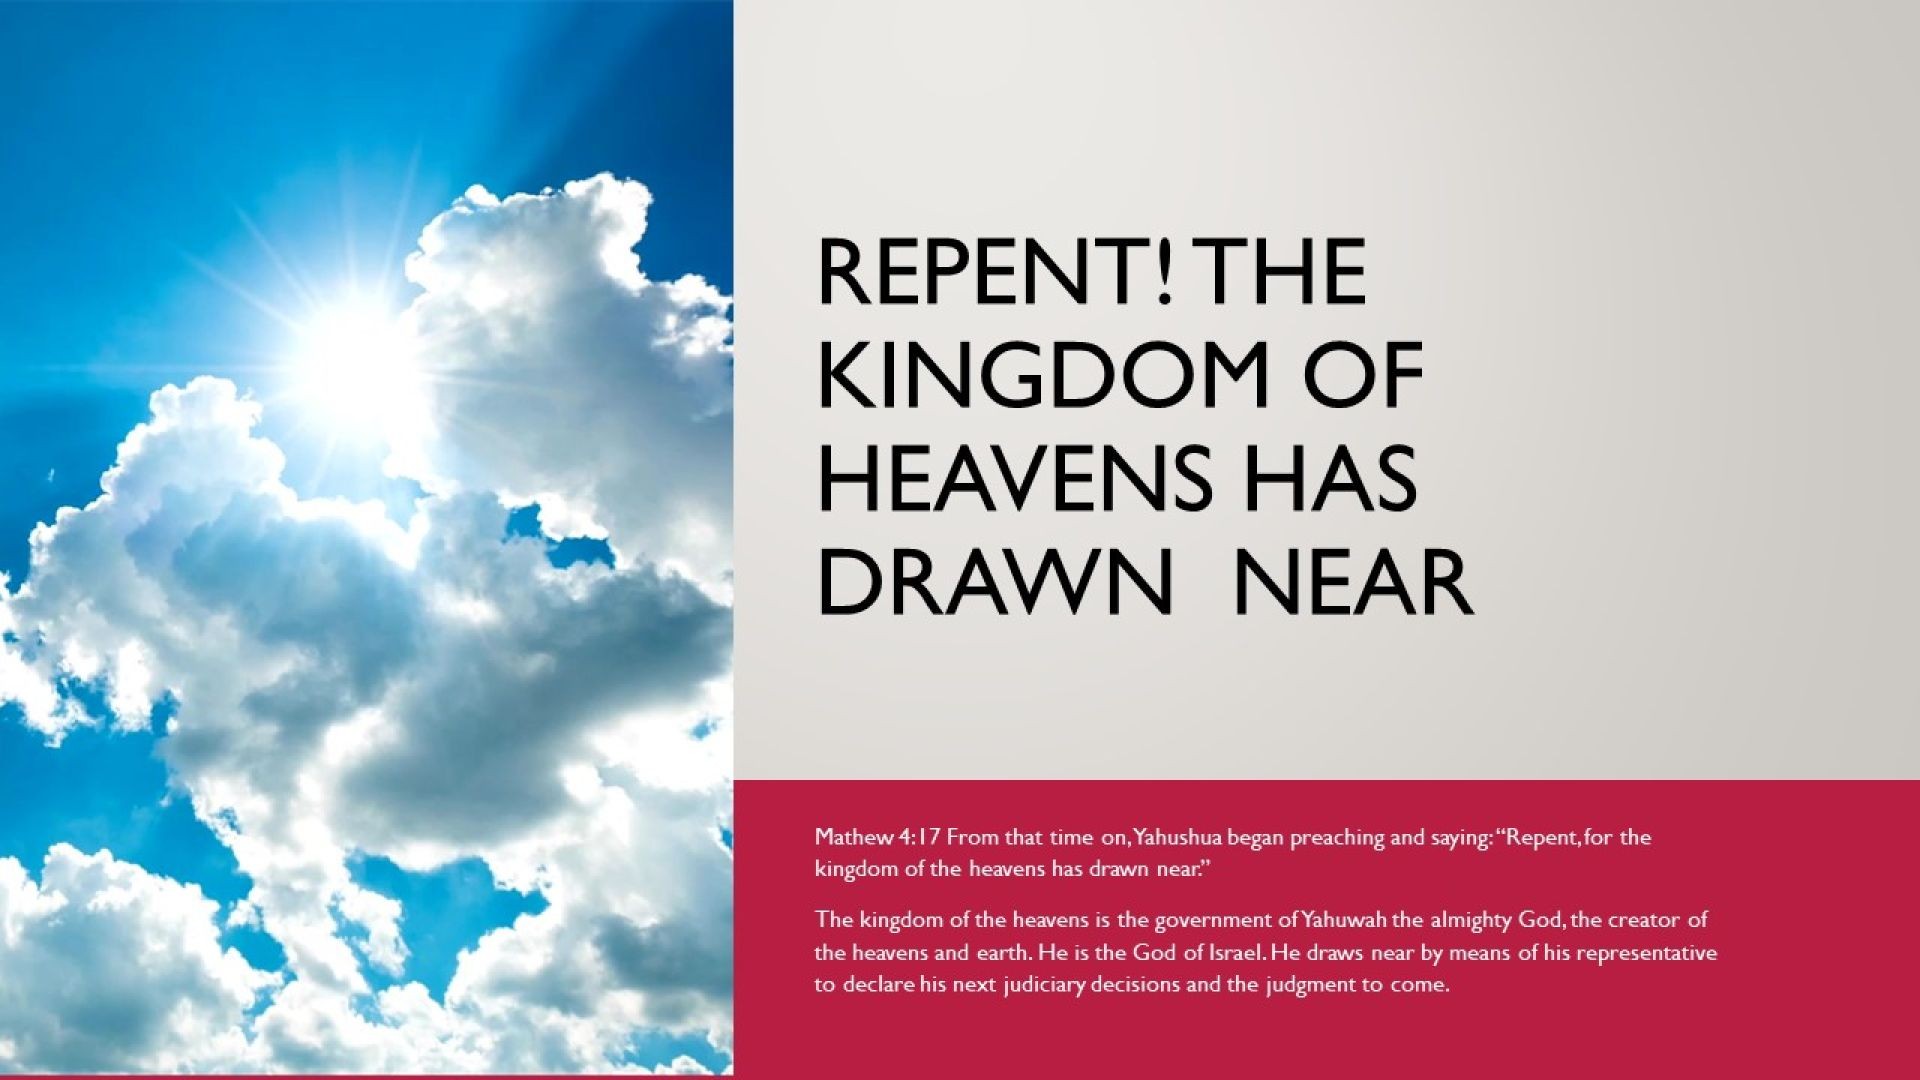 Repent Now, for the kingdom of the heavens has drawn near again.